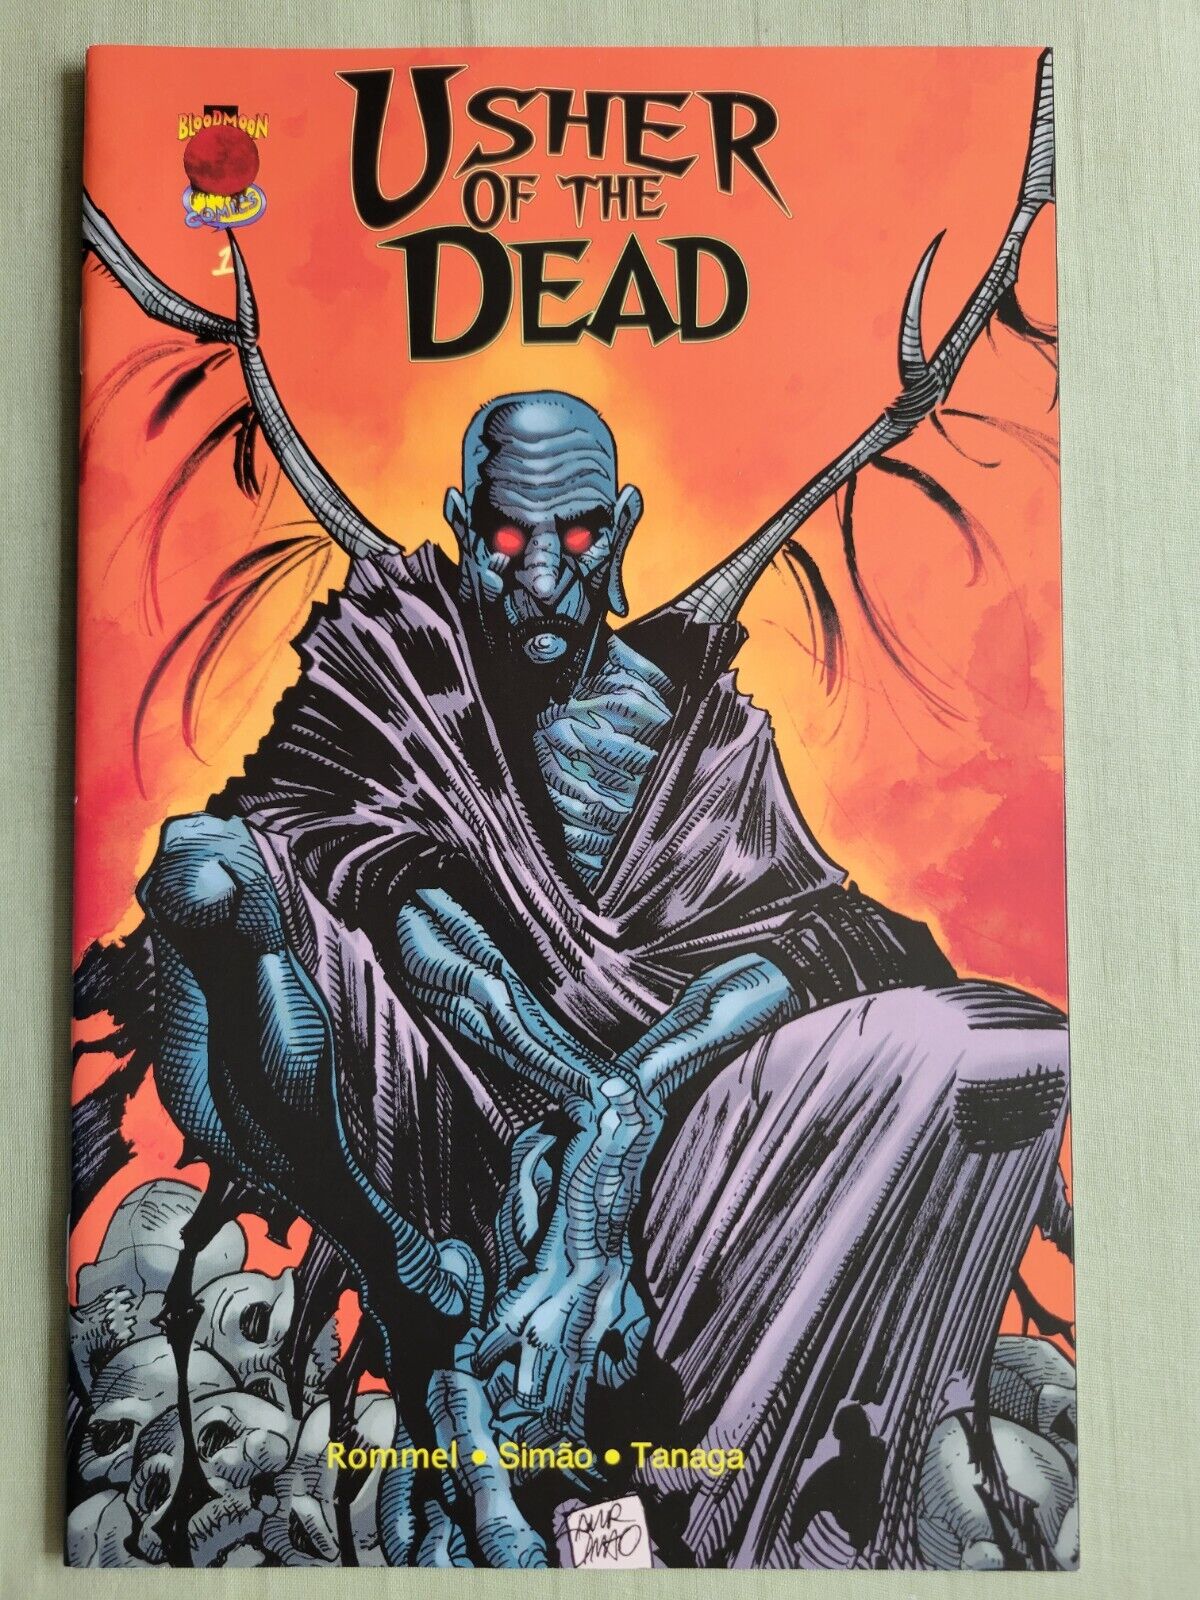 Usher of the Dead #1 (Cover A)